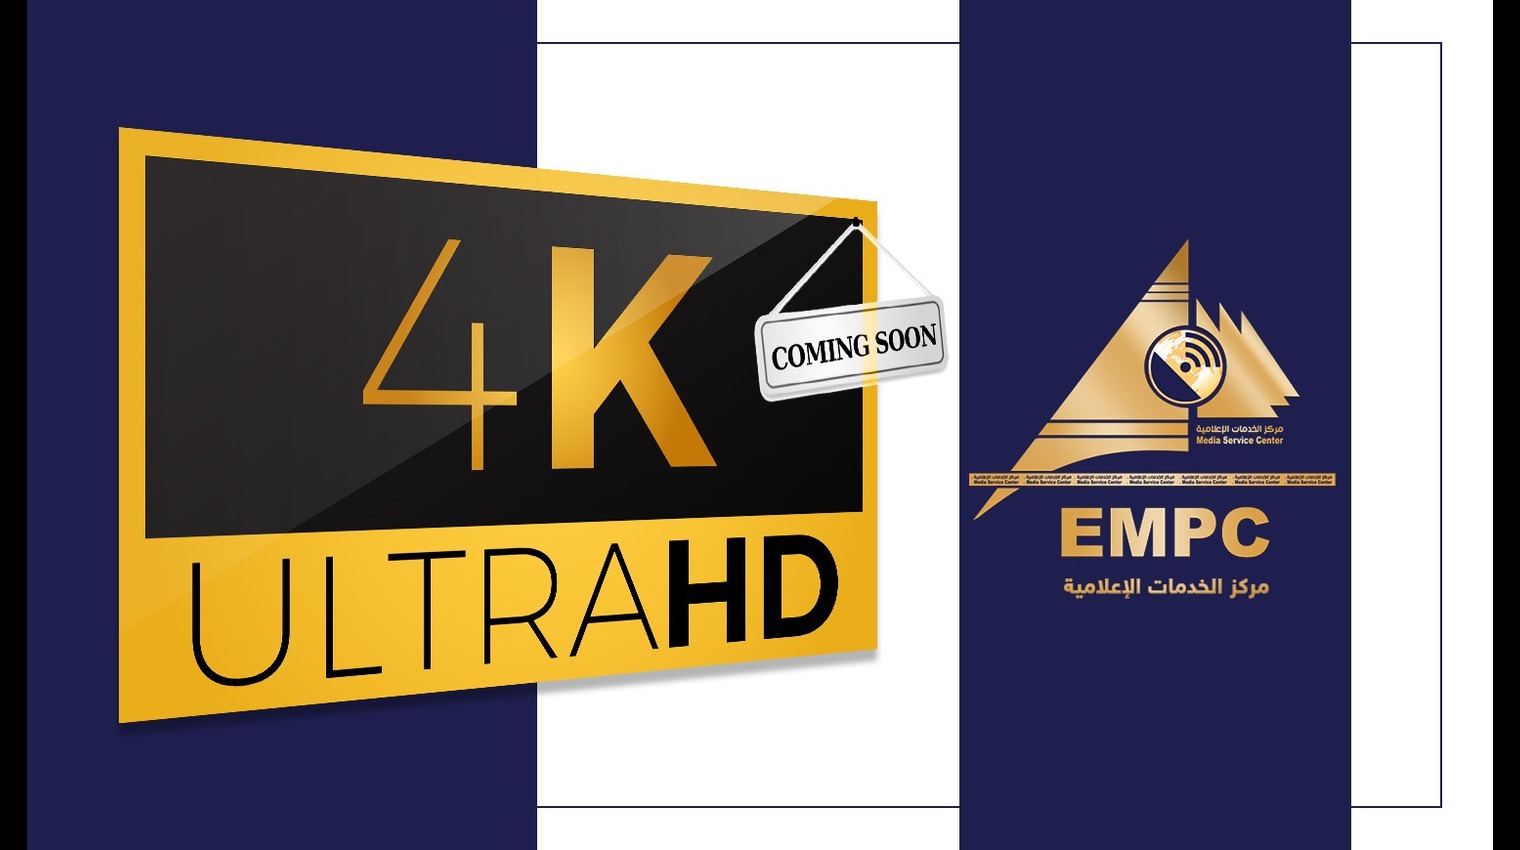 For Broadcasting with the Highest Quality EMPC Provides the studios of the Media Services Center with 4K Technology